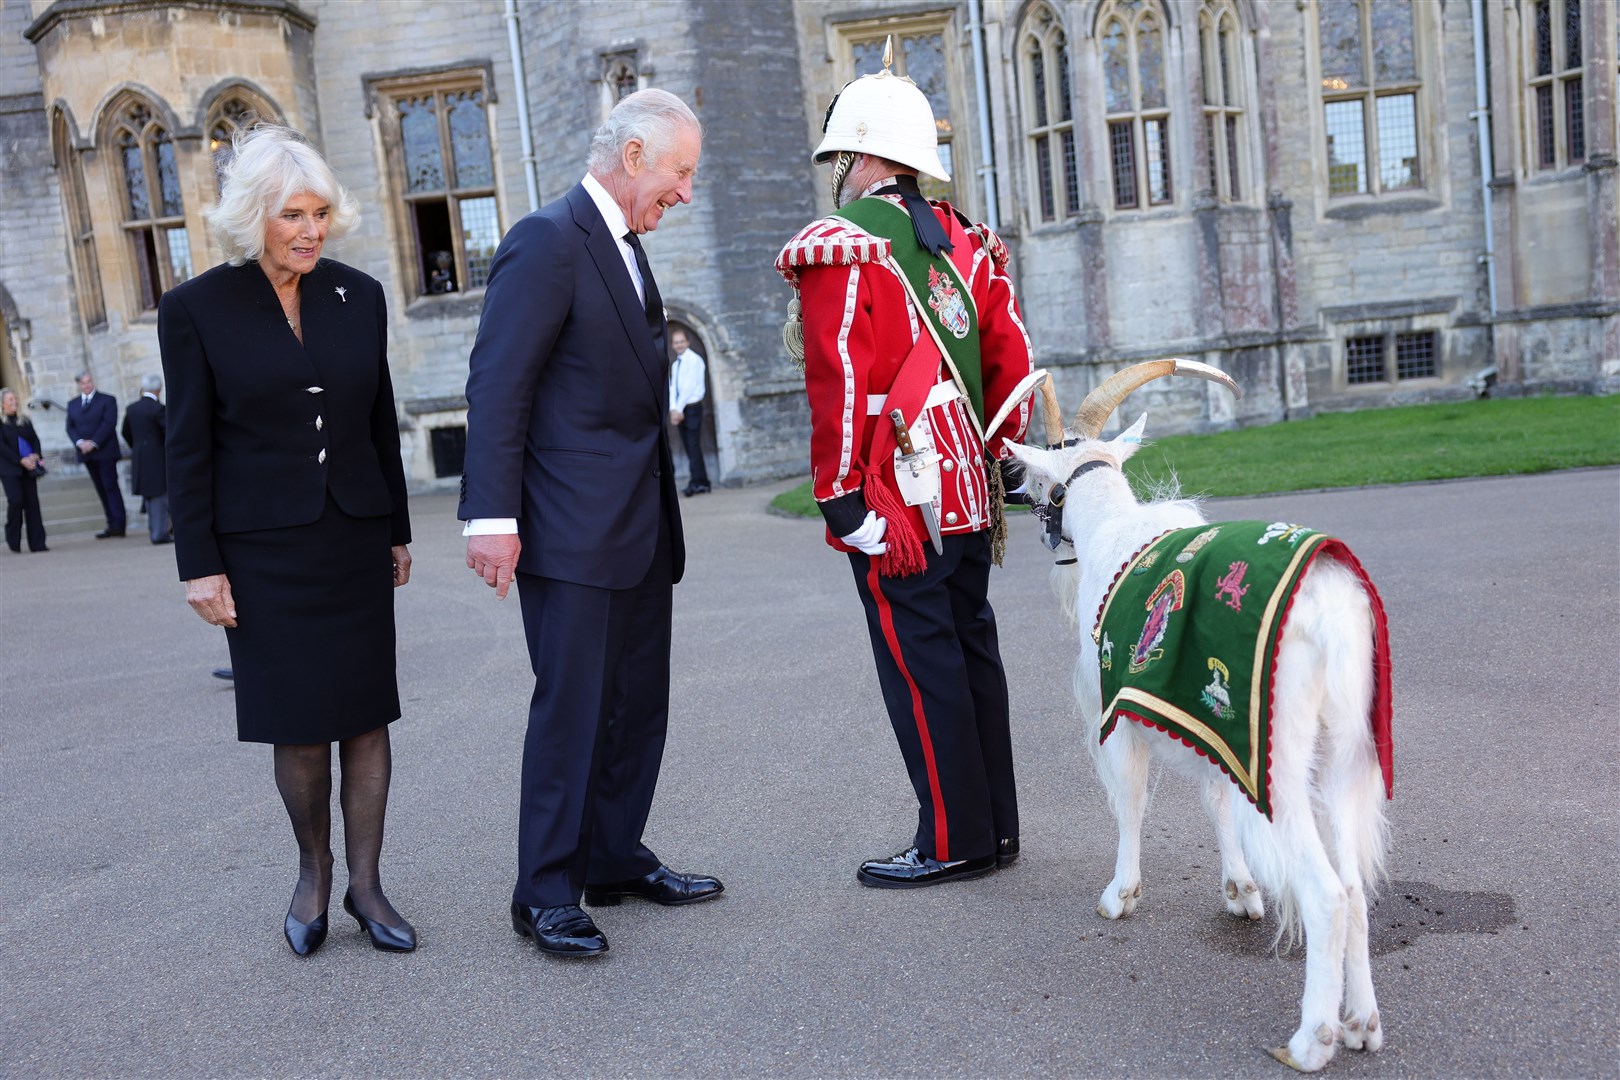 The King and the Queen Consort meet Sheinkin IV, goat mascot for the Royal Welsh Third Battalion at Cardiff Castle (Chris Jackson/PA)